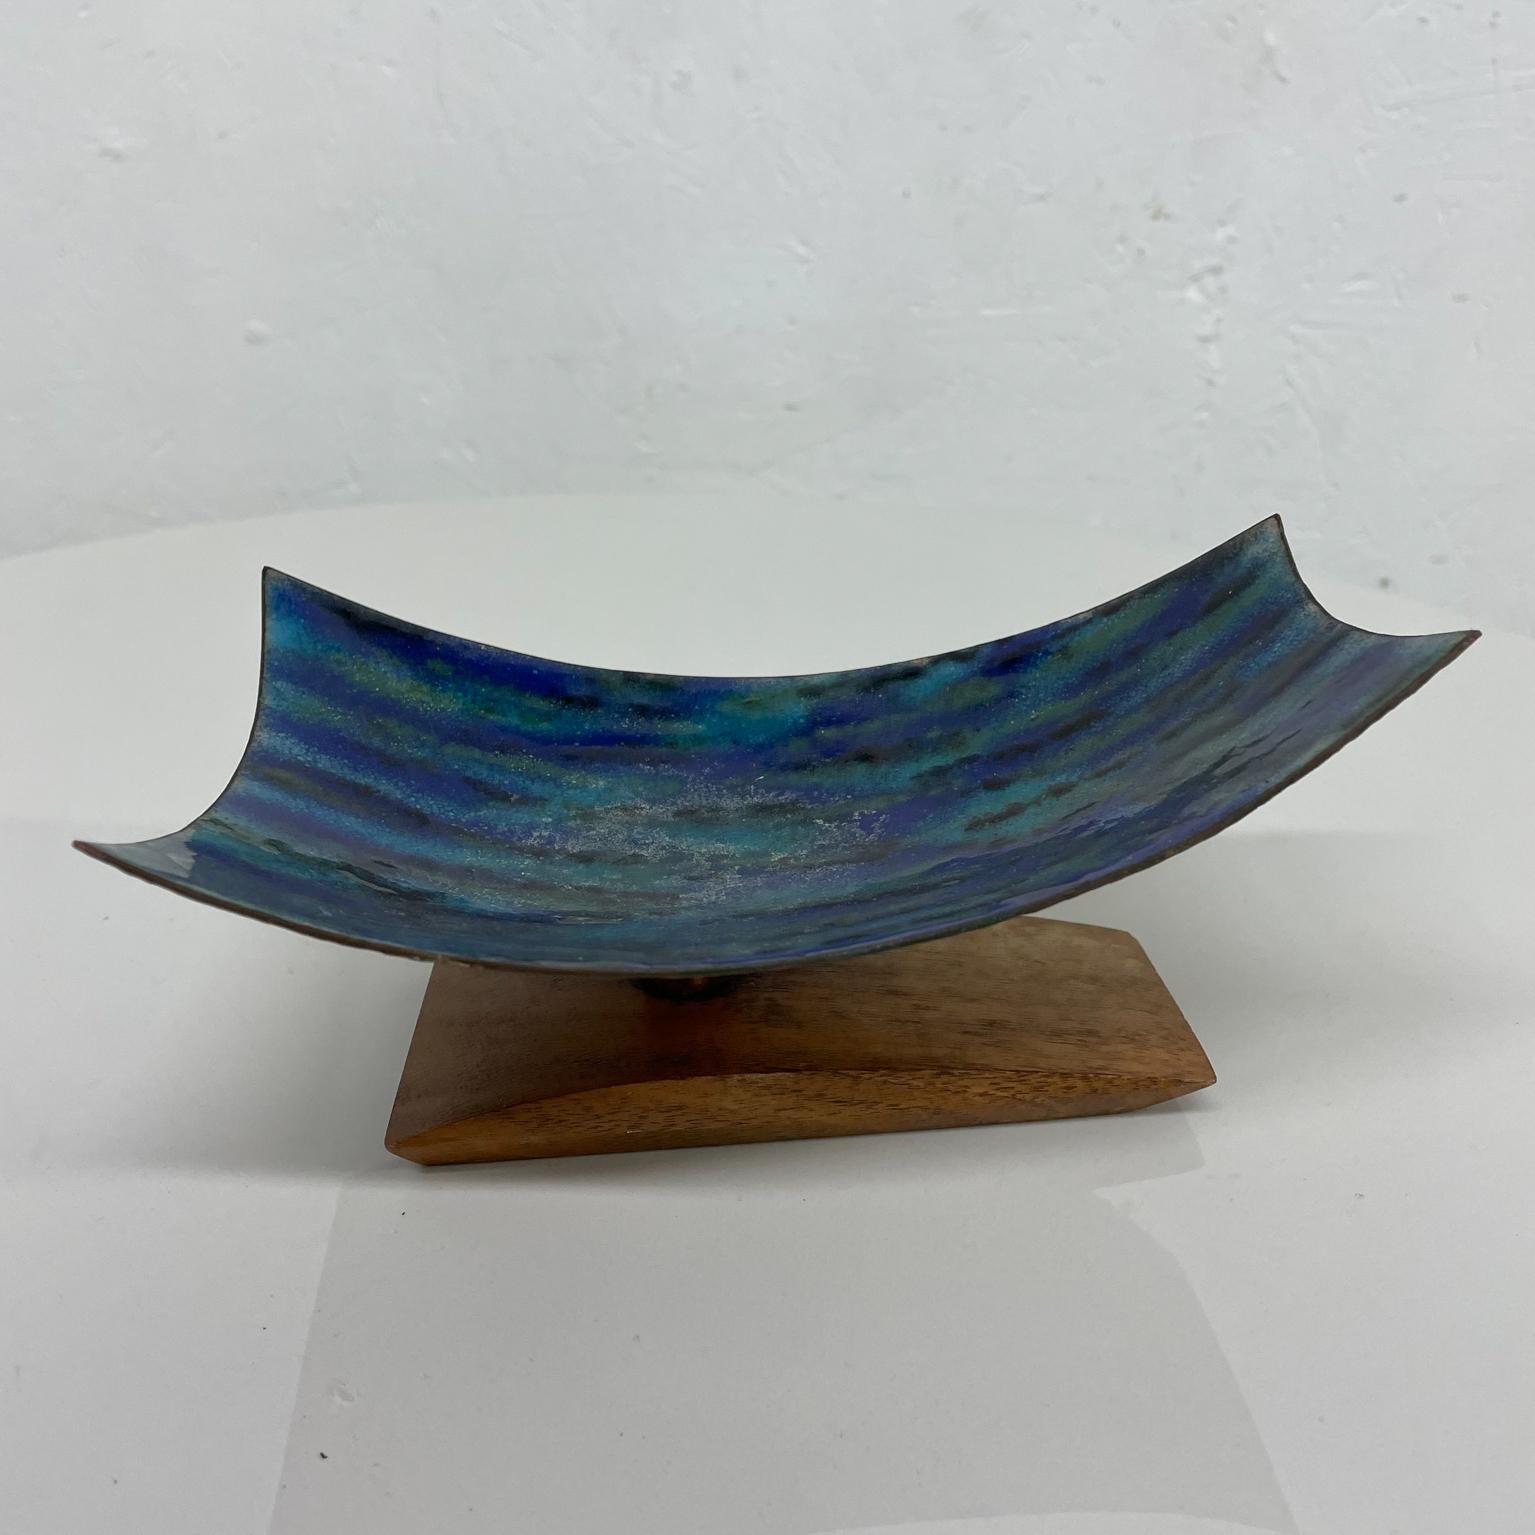 1980s Modern Curved Lines Blue Enamel Sculpture Koa Wood Base  In Good Condition For Sale In Chula Vista, CA